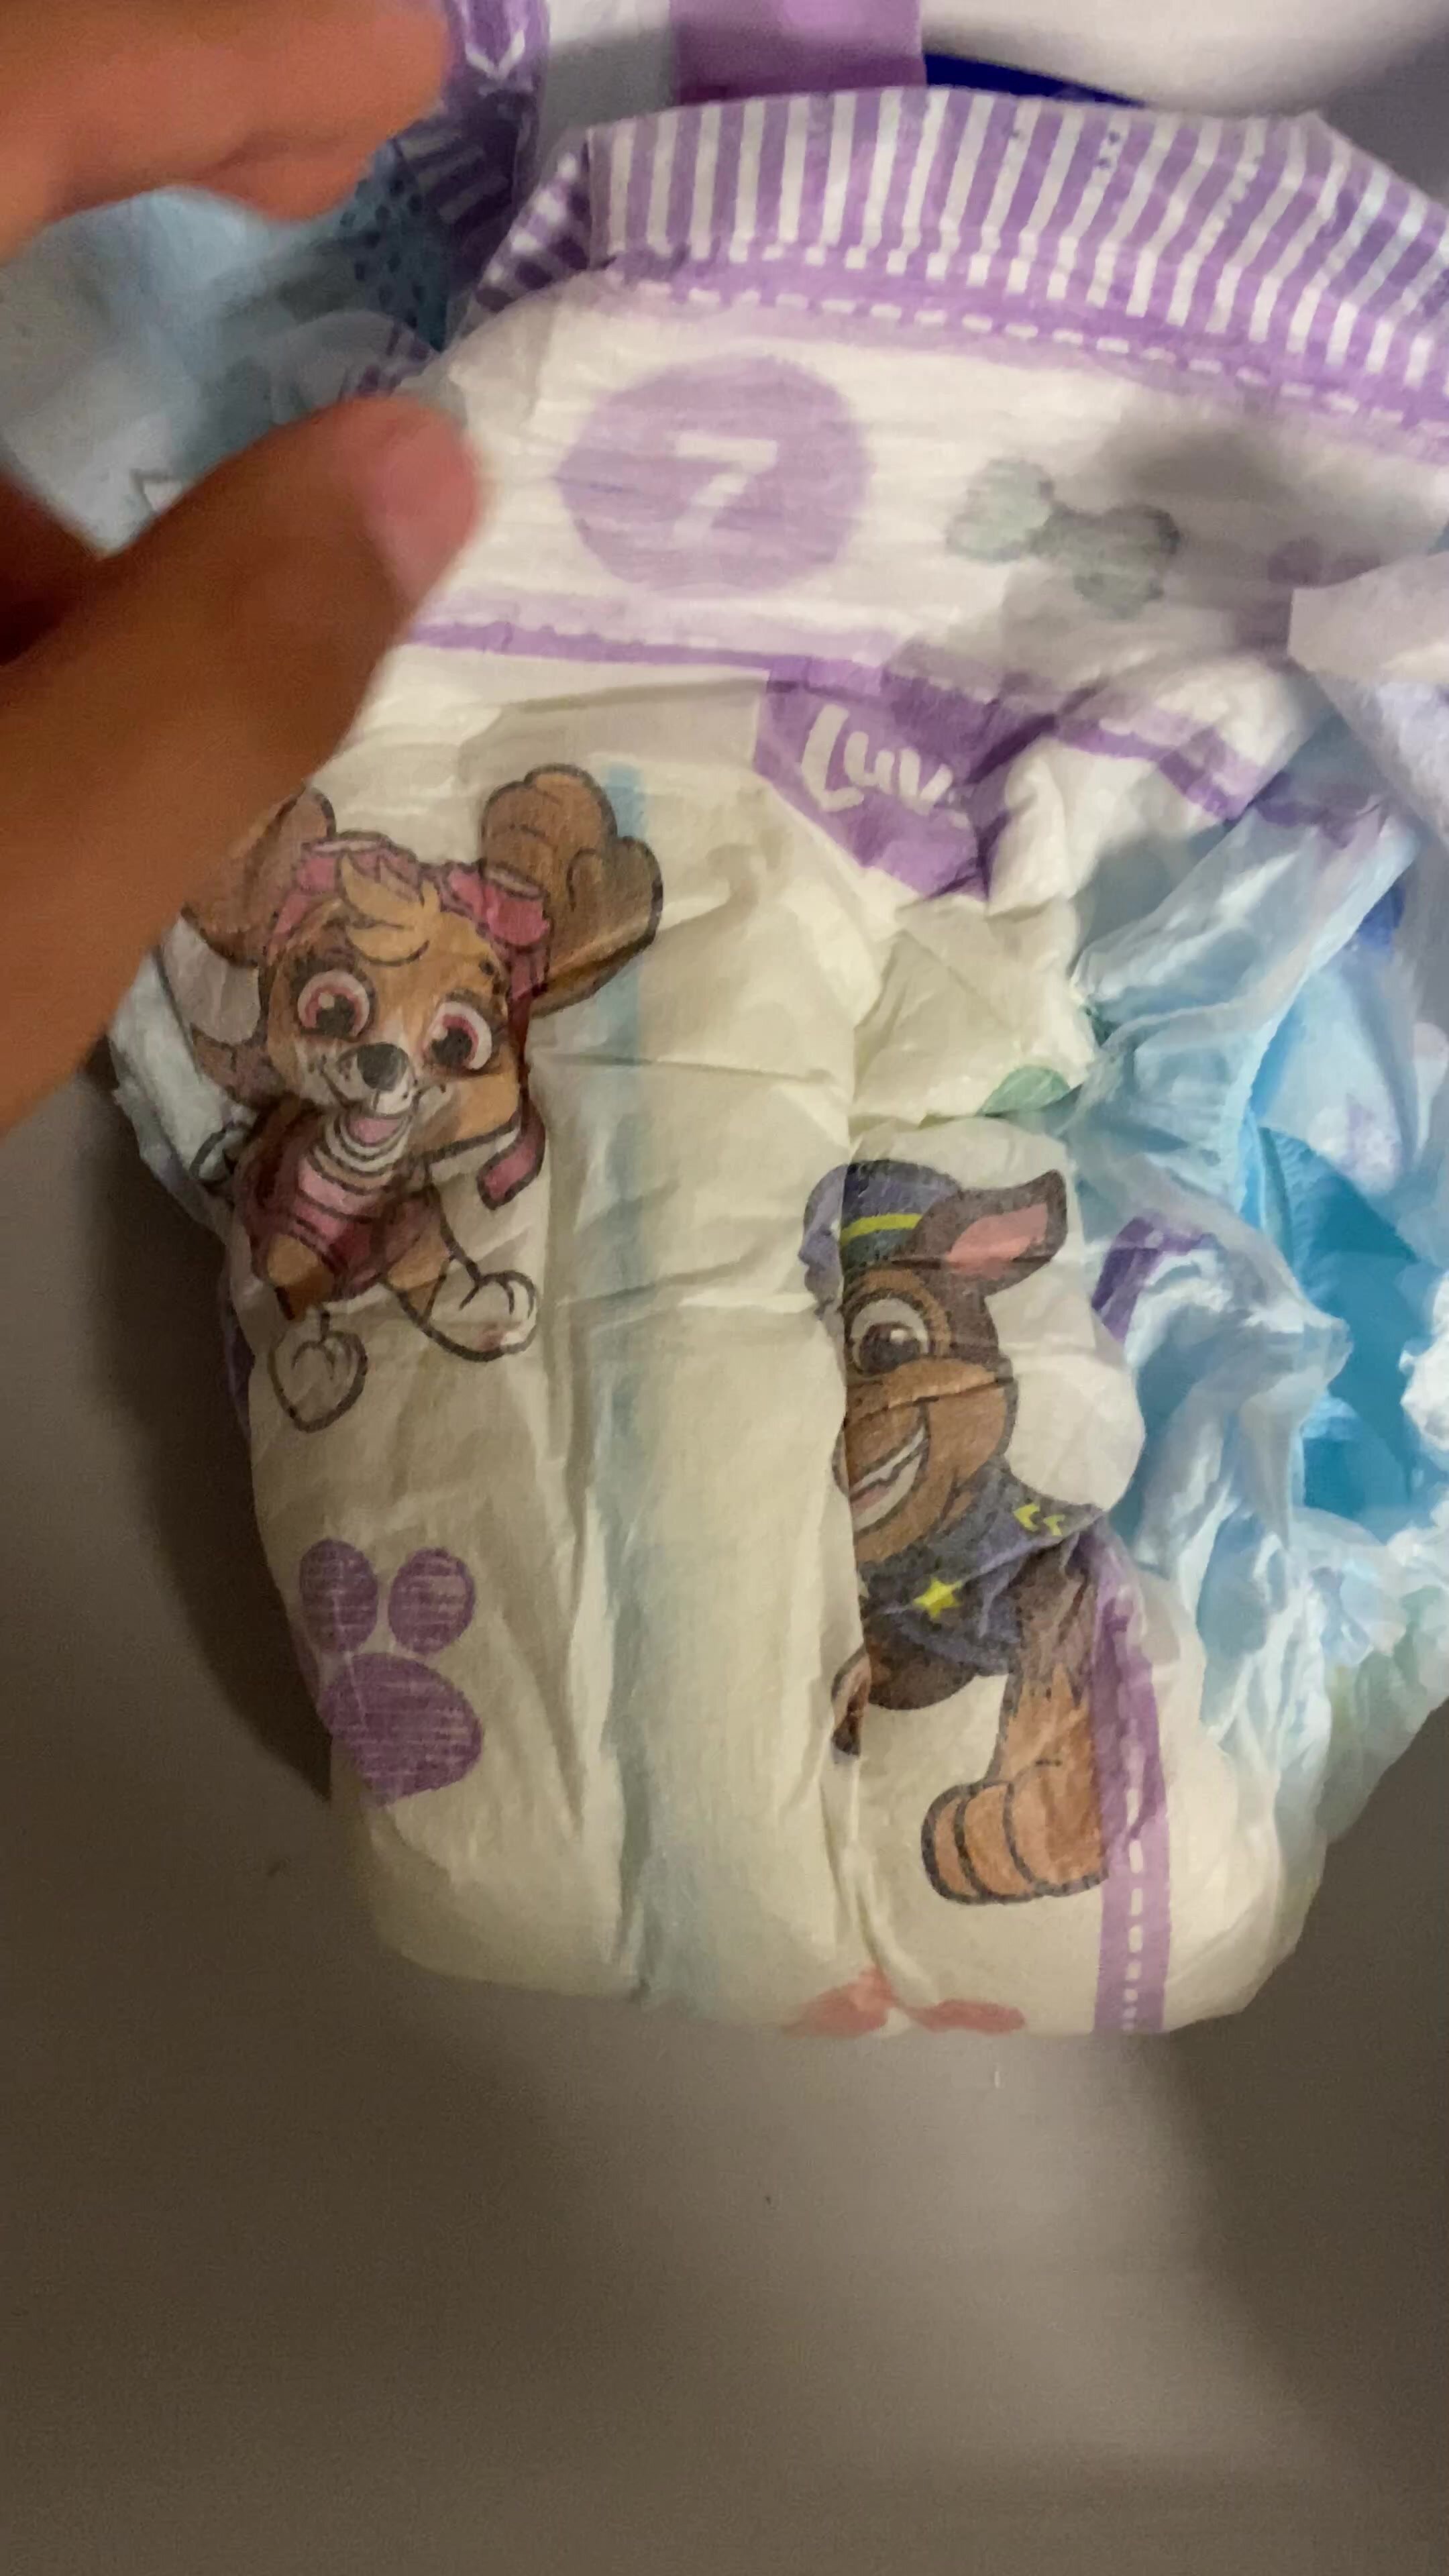 Piss filled diapers